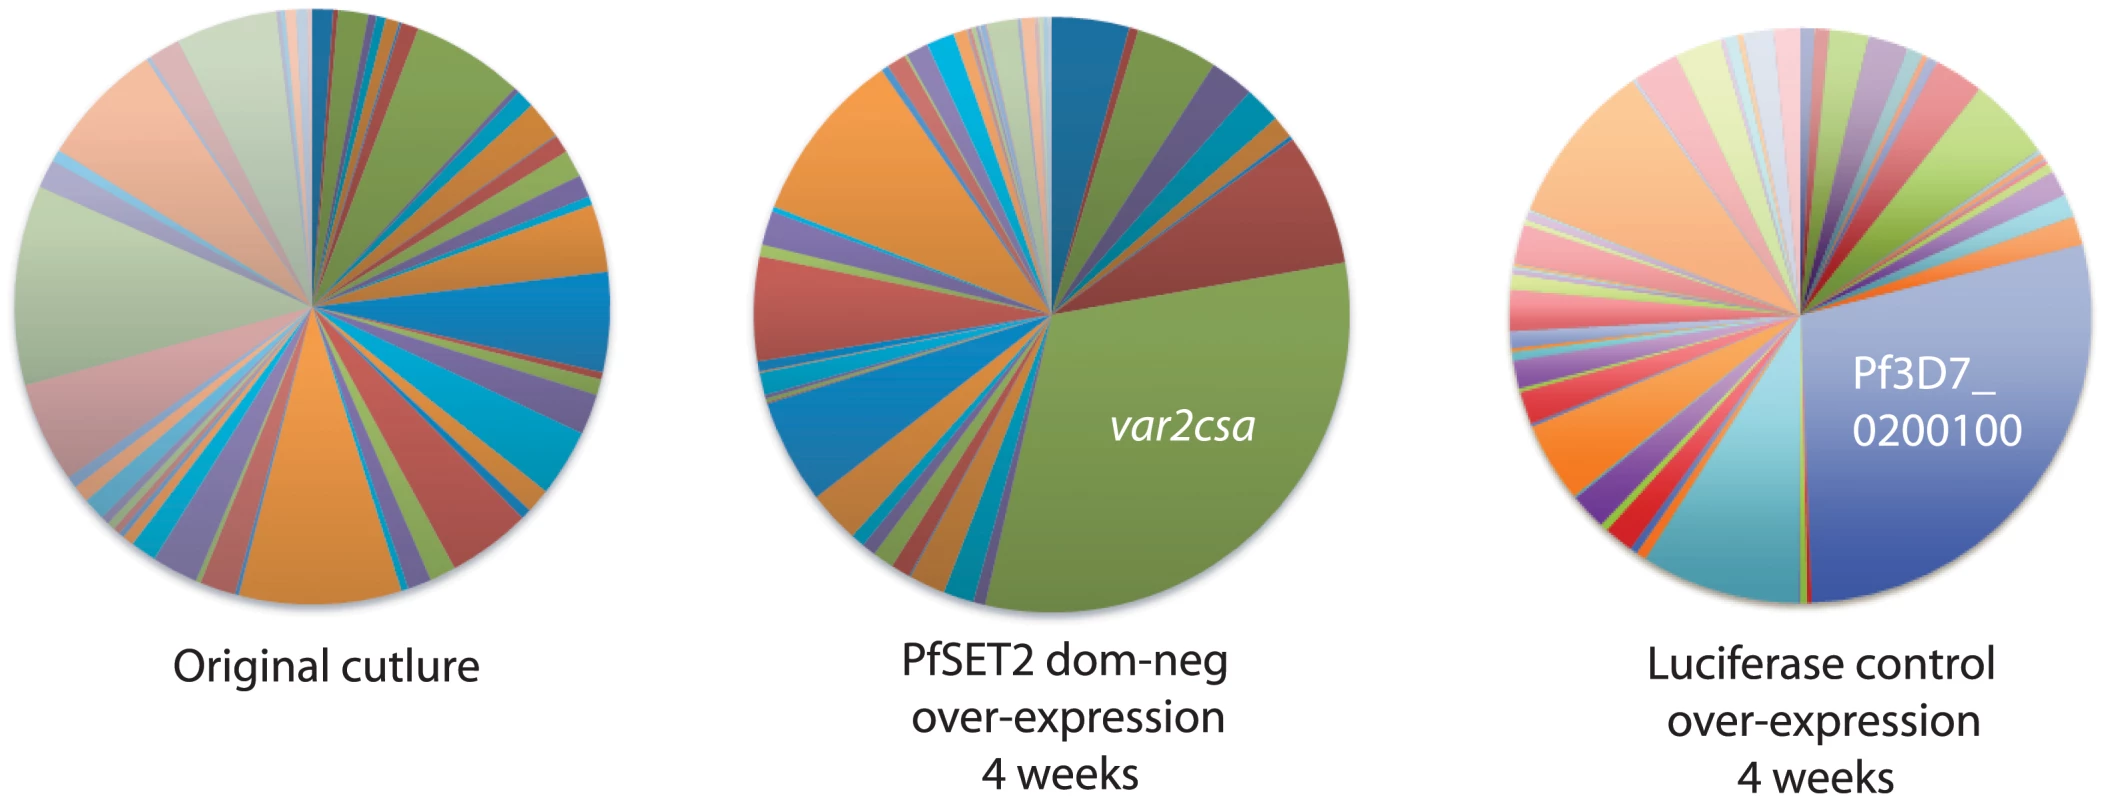 Induction of <i>var2csa</i> expression in response to PfSET2 dom-neg over-expression in a heterogenous population expressing many <i>var</i> genes.